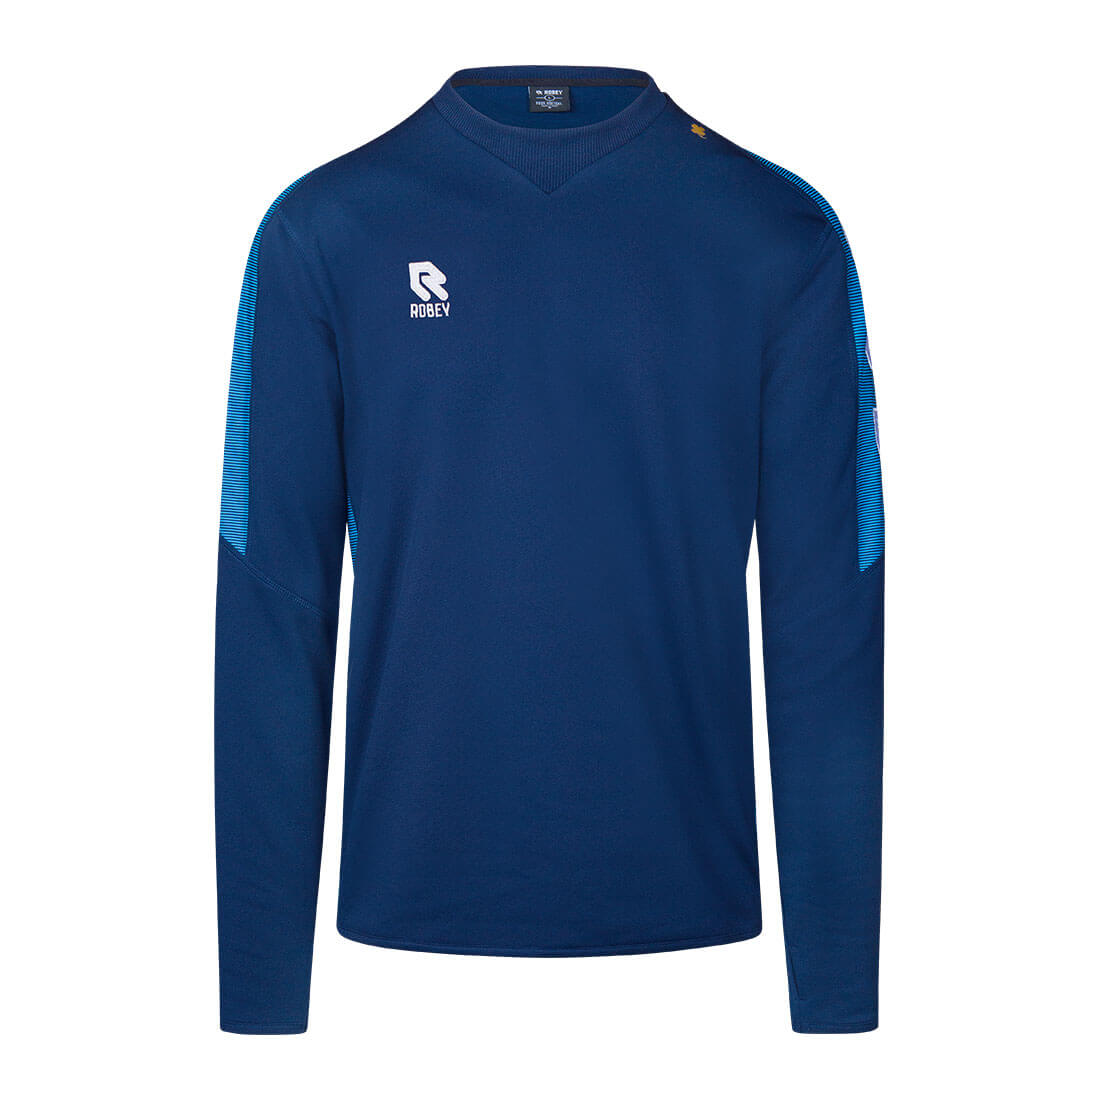 Robey Performance Sweater - Navy Sky Blue